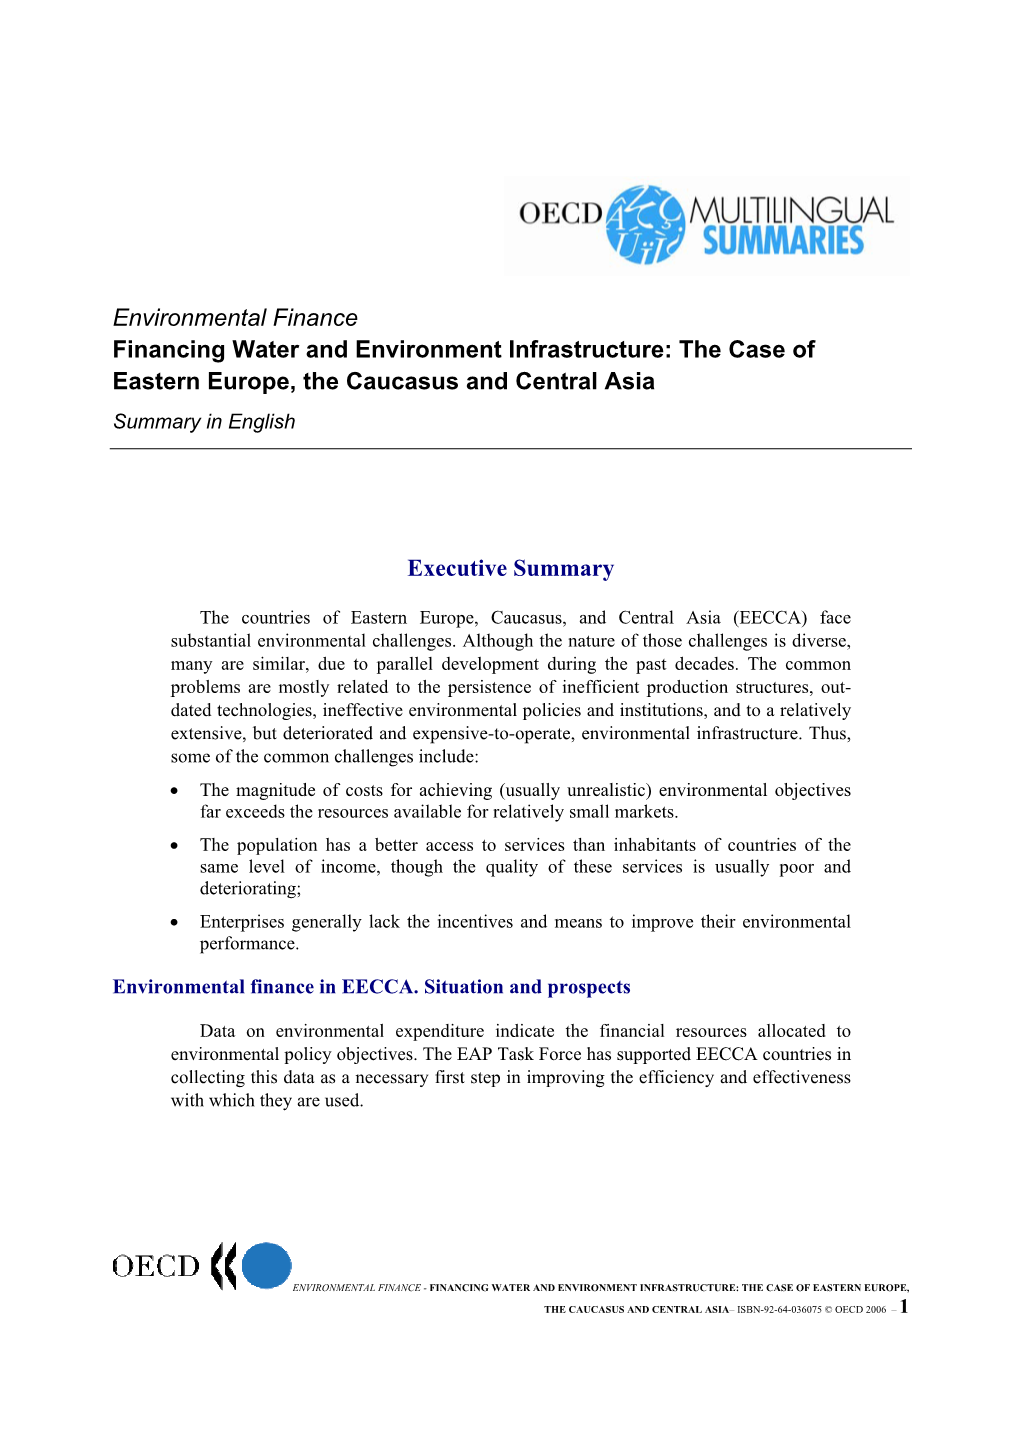 Financing Water and Environment Infrastructure: the Case of Eastern Europe, the Caucasus and Central Asia Summary in English